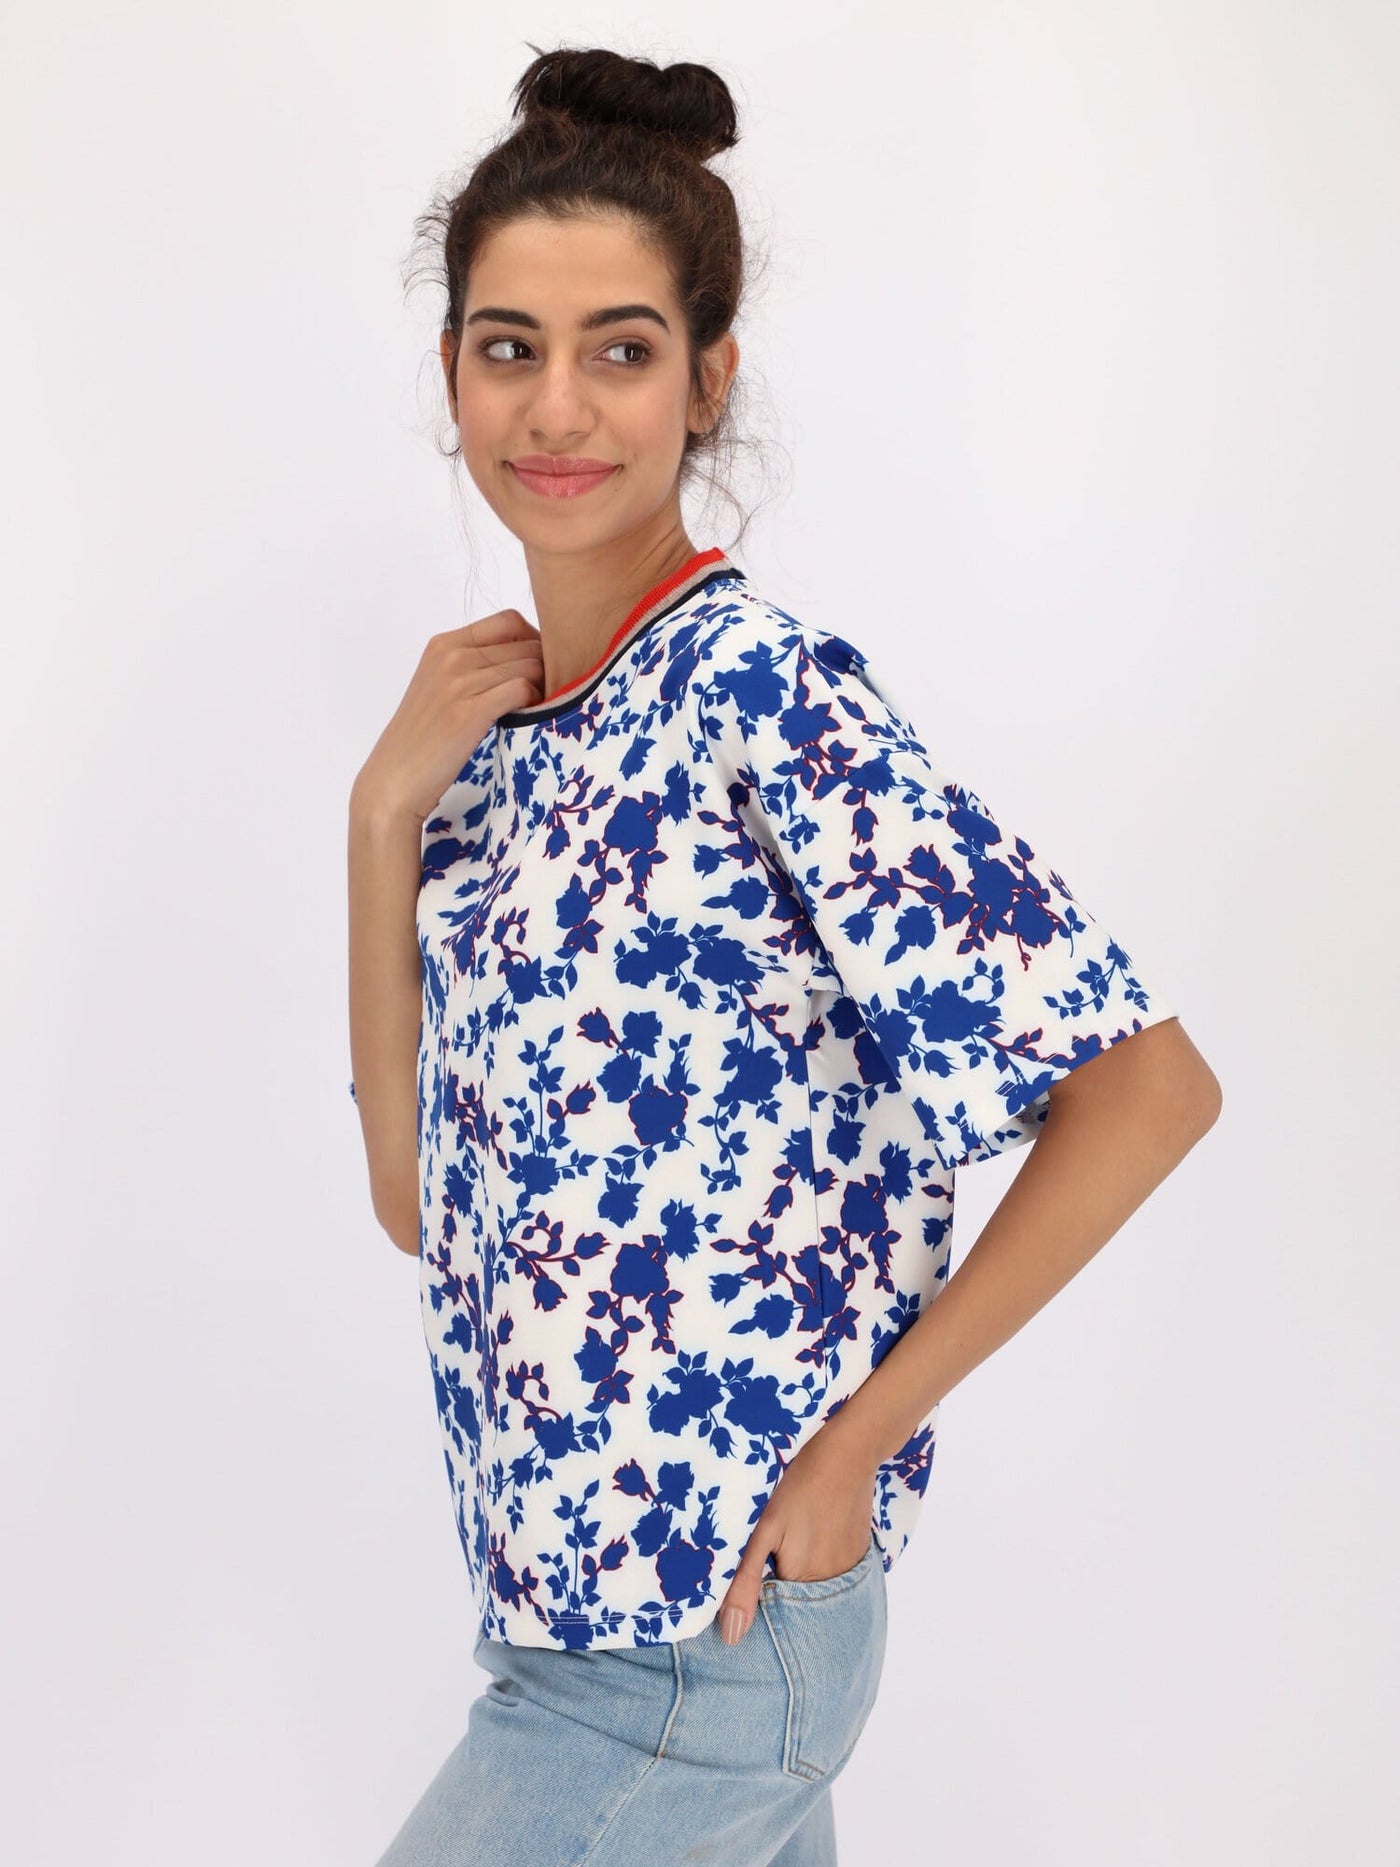 OR Tops & Blouses Floral Casual Top